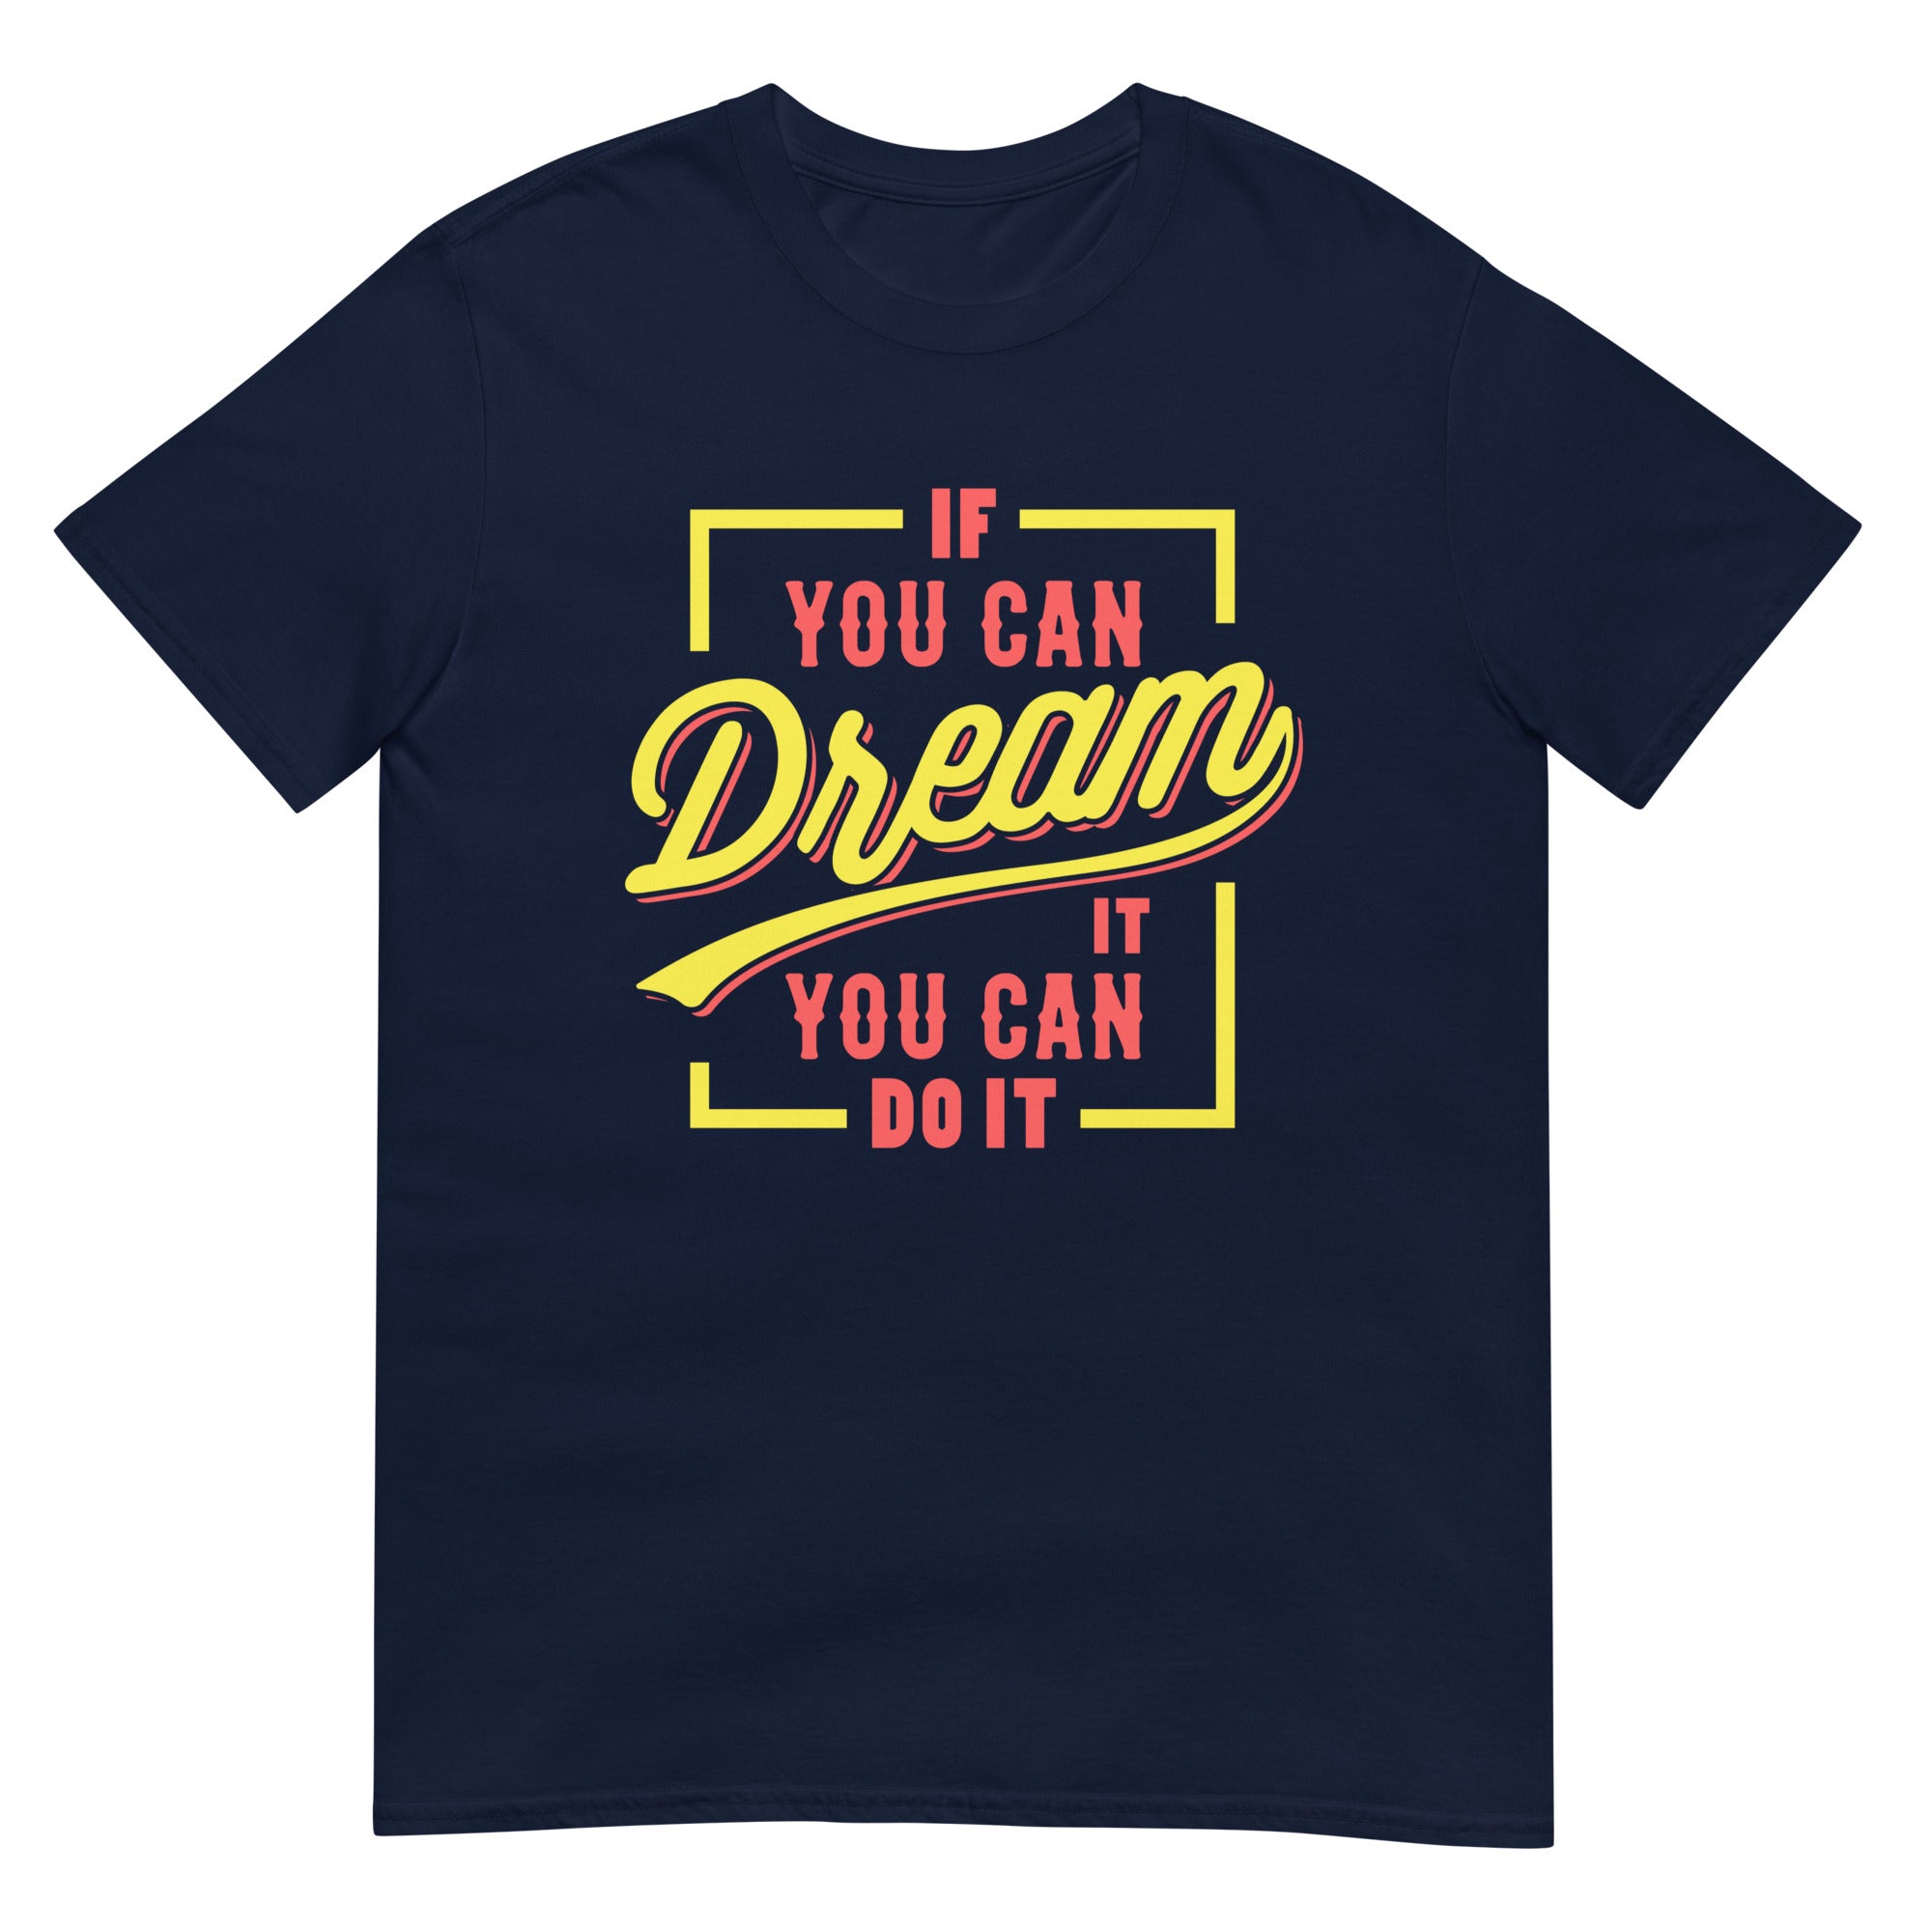 If You Can Dream It - Short-Sleeve Unisex T-Shirt